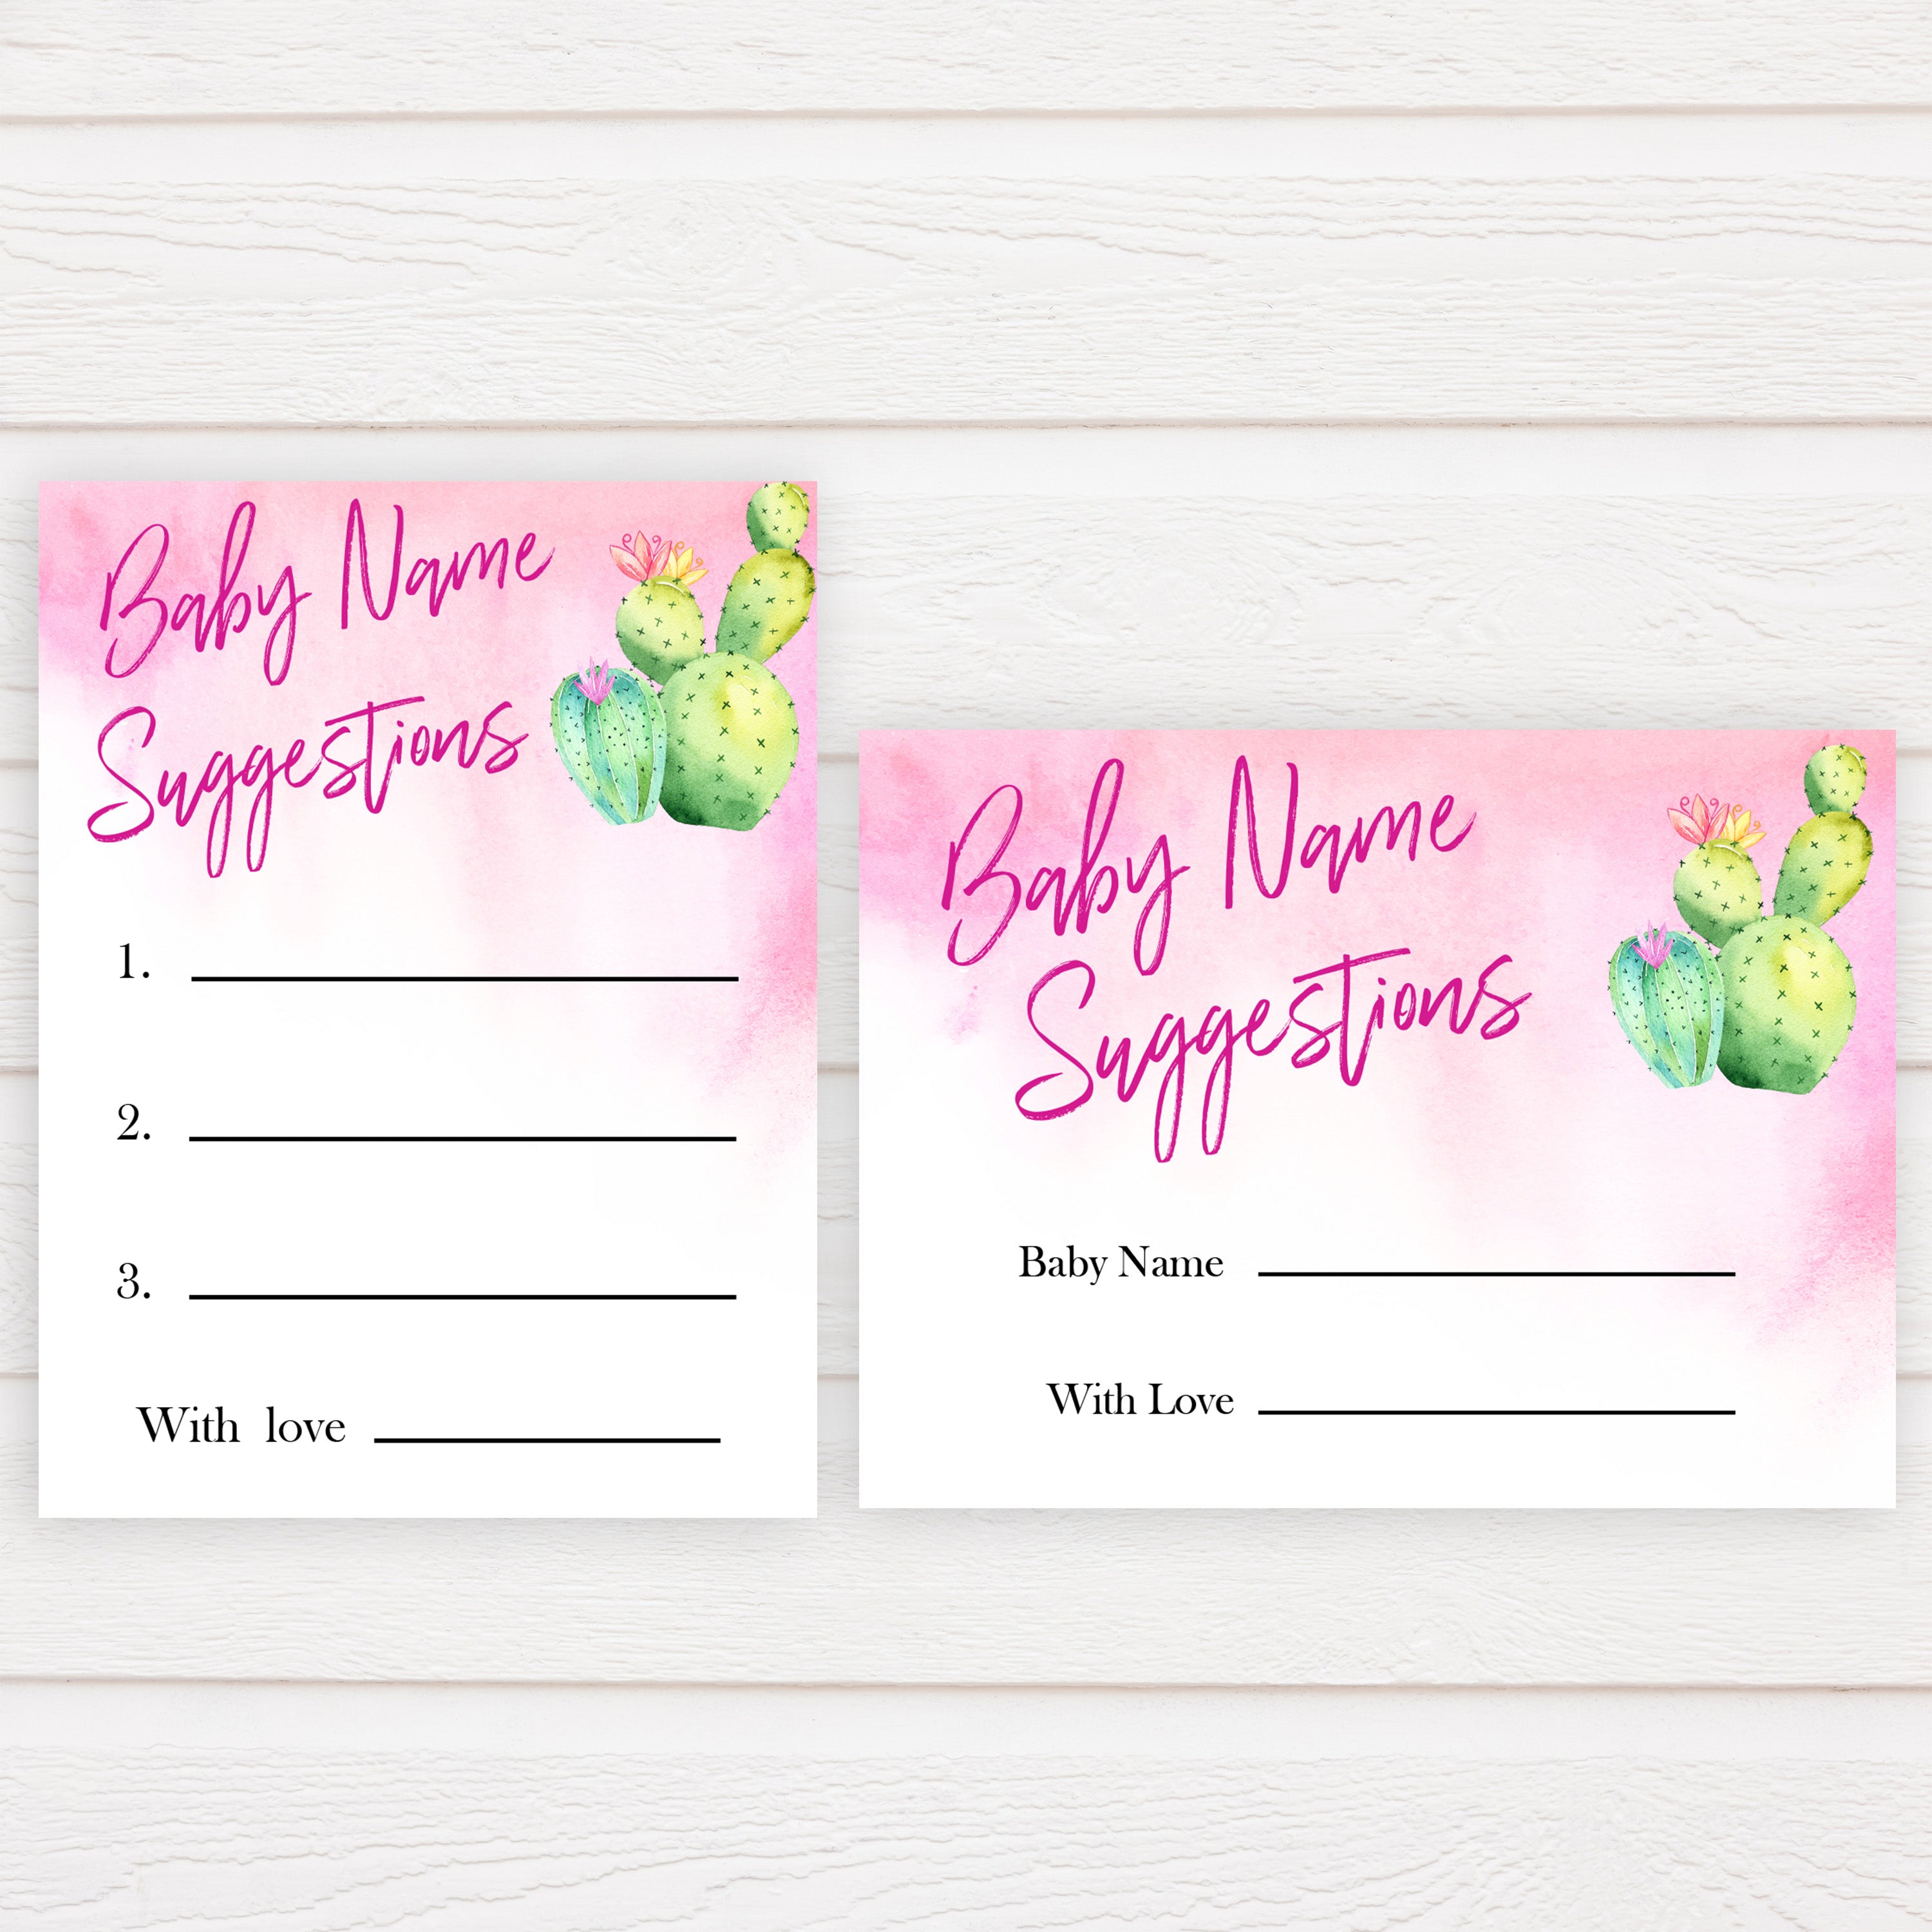 Cactus baby shower games, cactus baby name suggestions baby game, printable baby games, Mexican baby shower, Mexican baby games, fiesta baby games, popular baby games, printable baby games